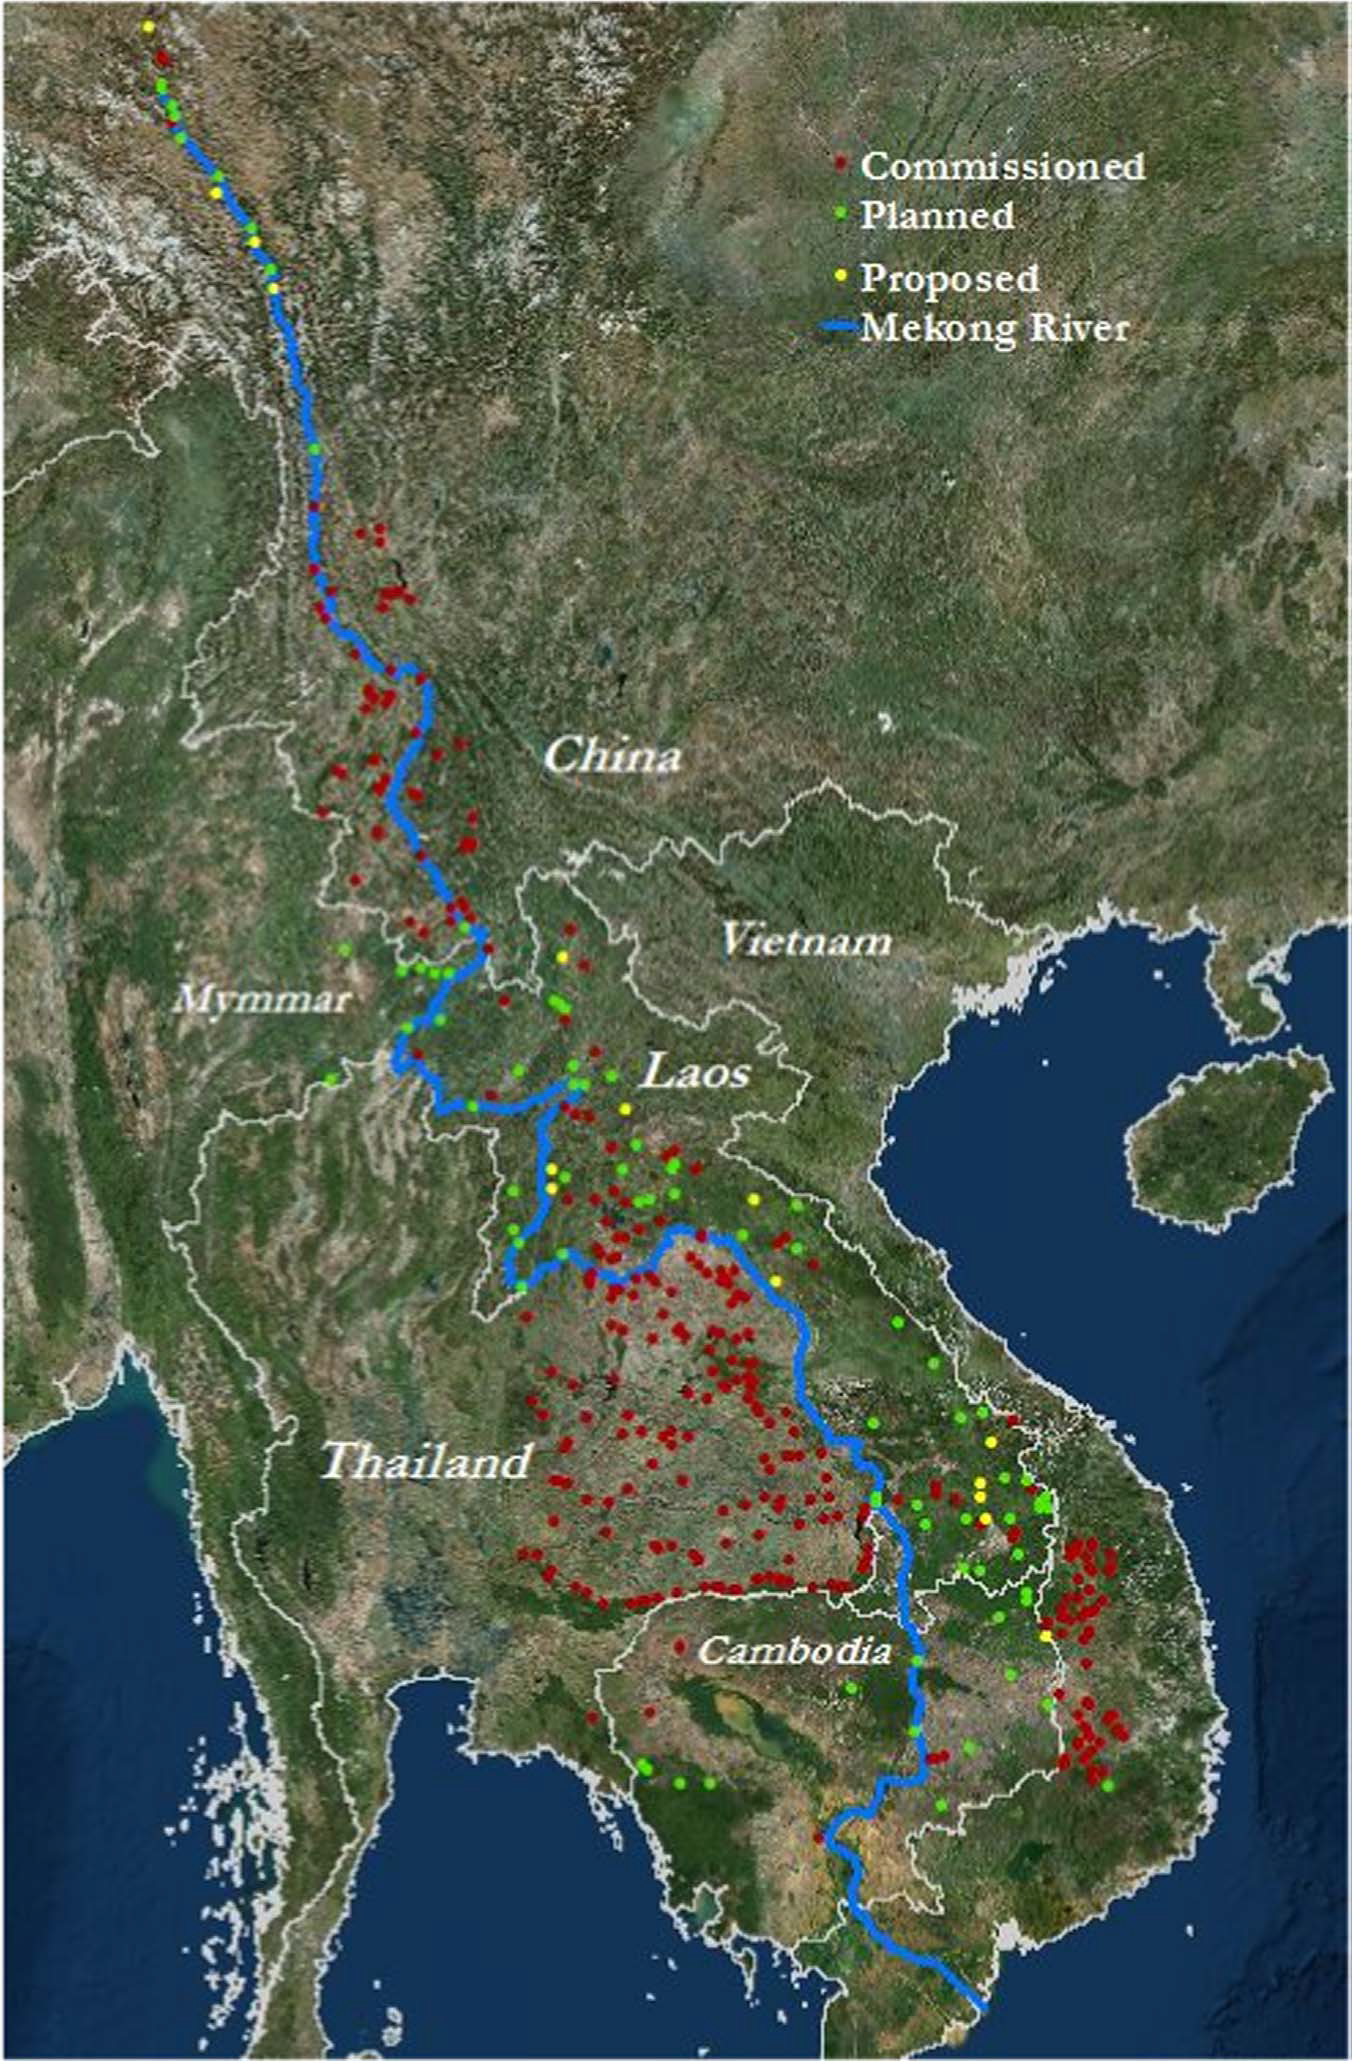 Figure 1 Distribution of hydro-dams in the entire Mekong River (Lin & Qi 2017)